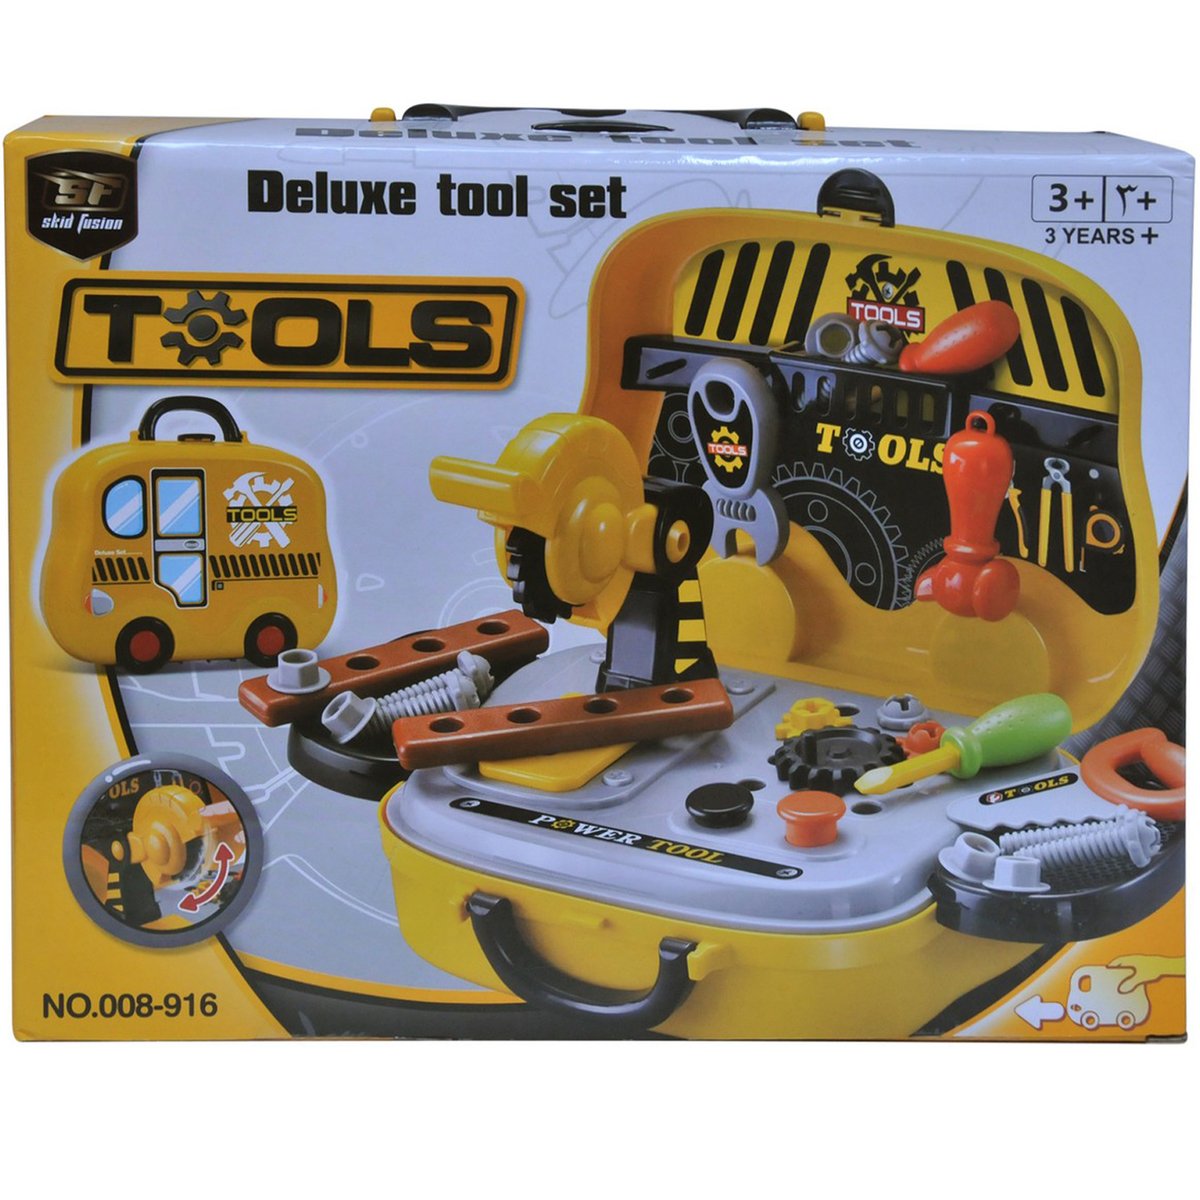 Skid Fusion Deluxe Tool Set 008-916